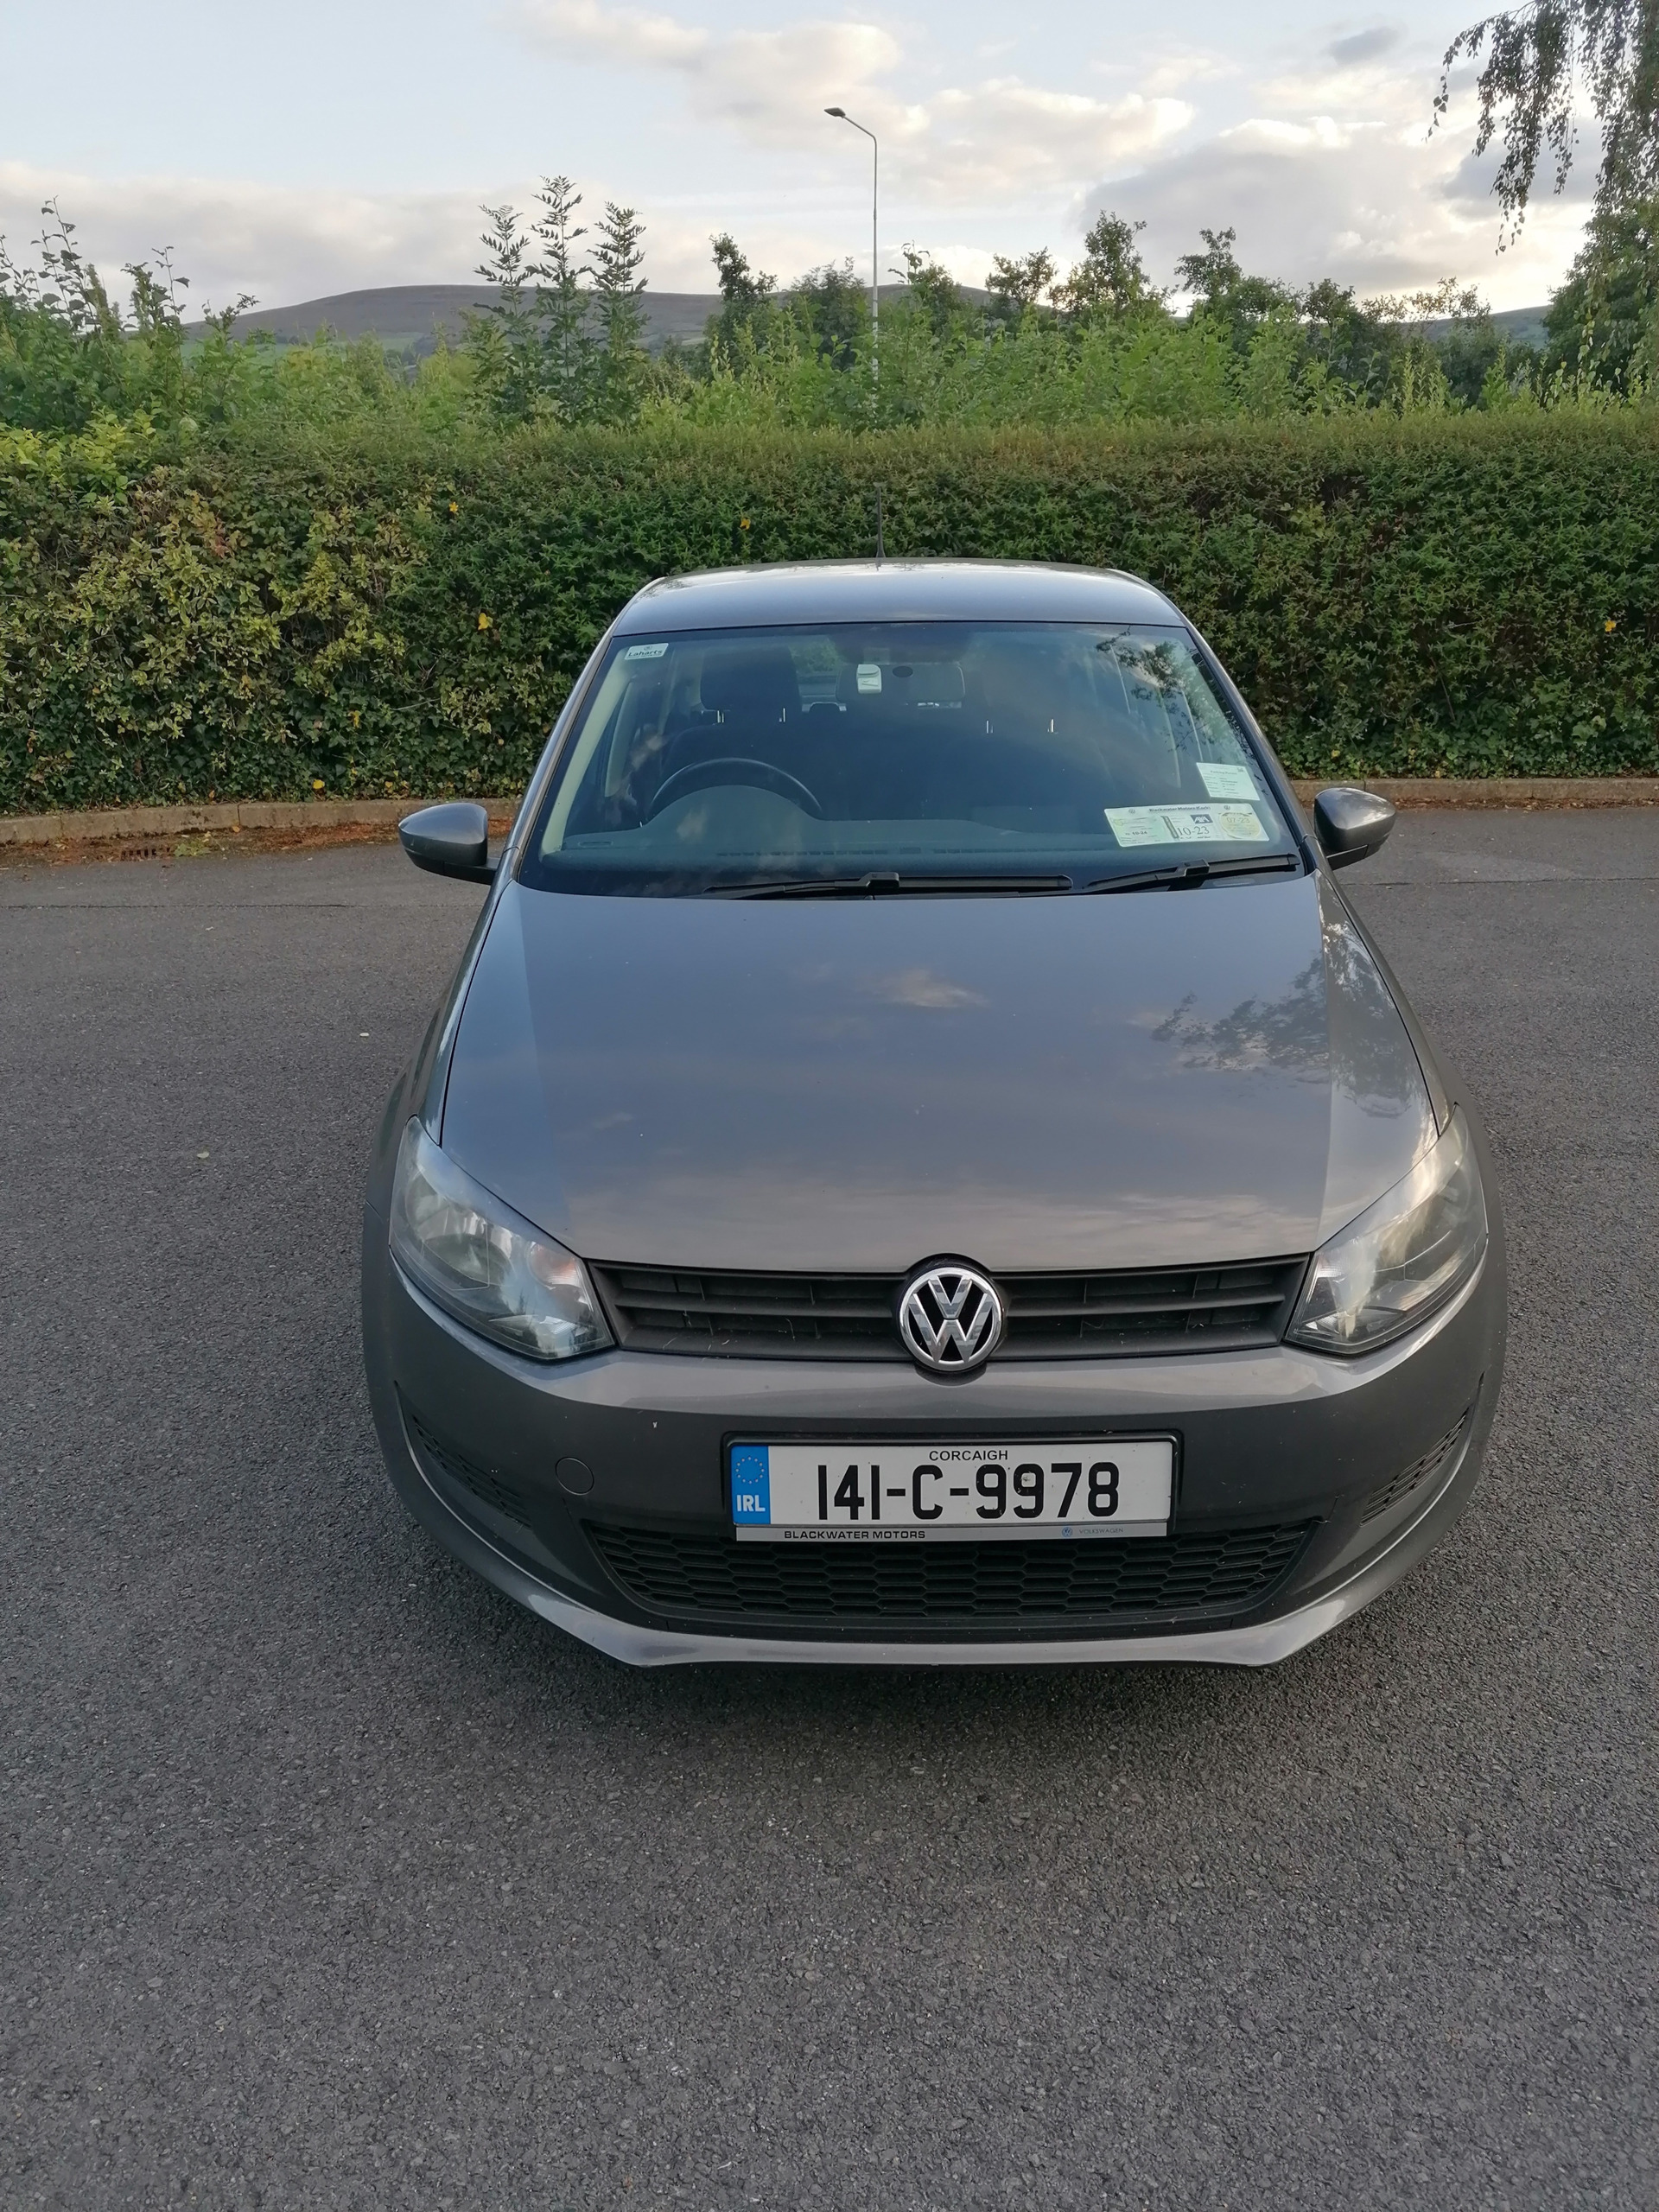 Used Volkswagen Polo 2014 in Tipperary